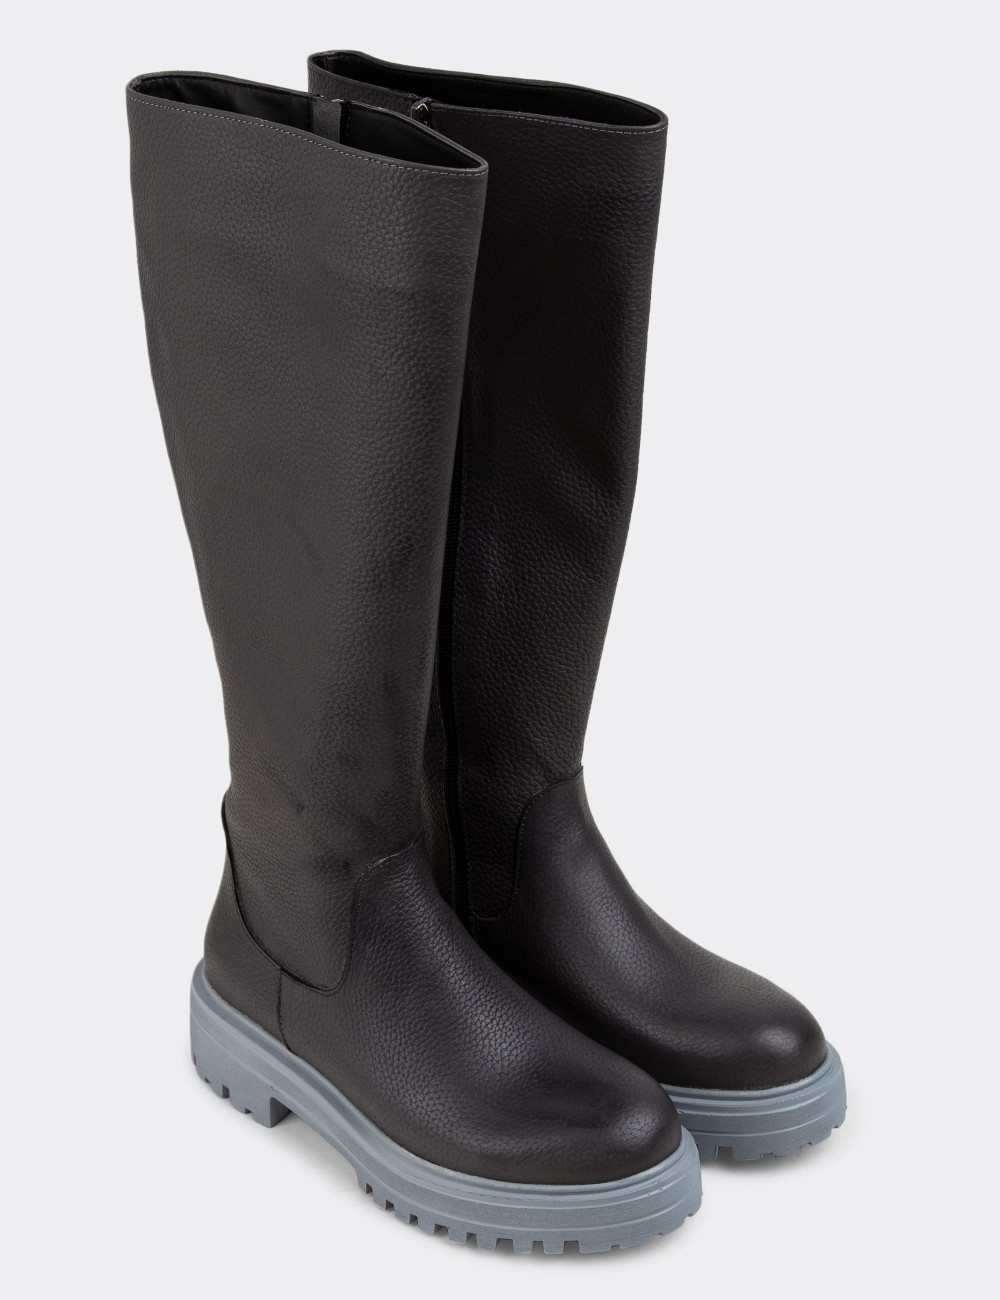 Gray Leather Boots - 01807ZGRIE01